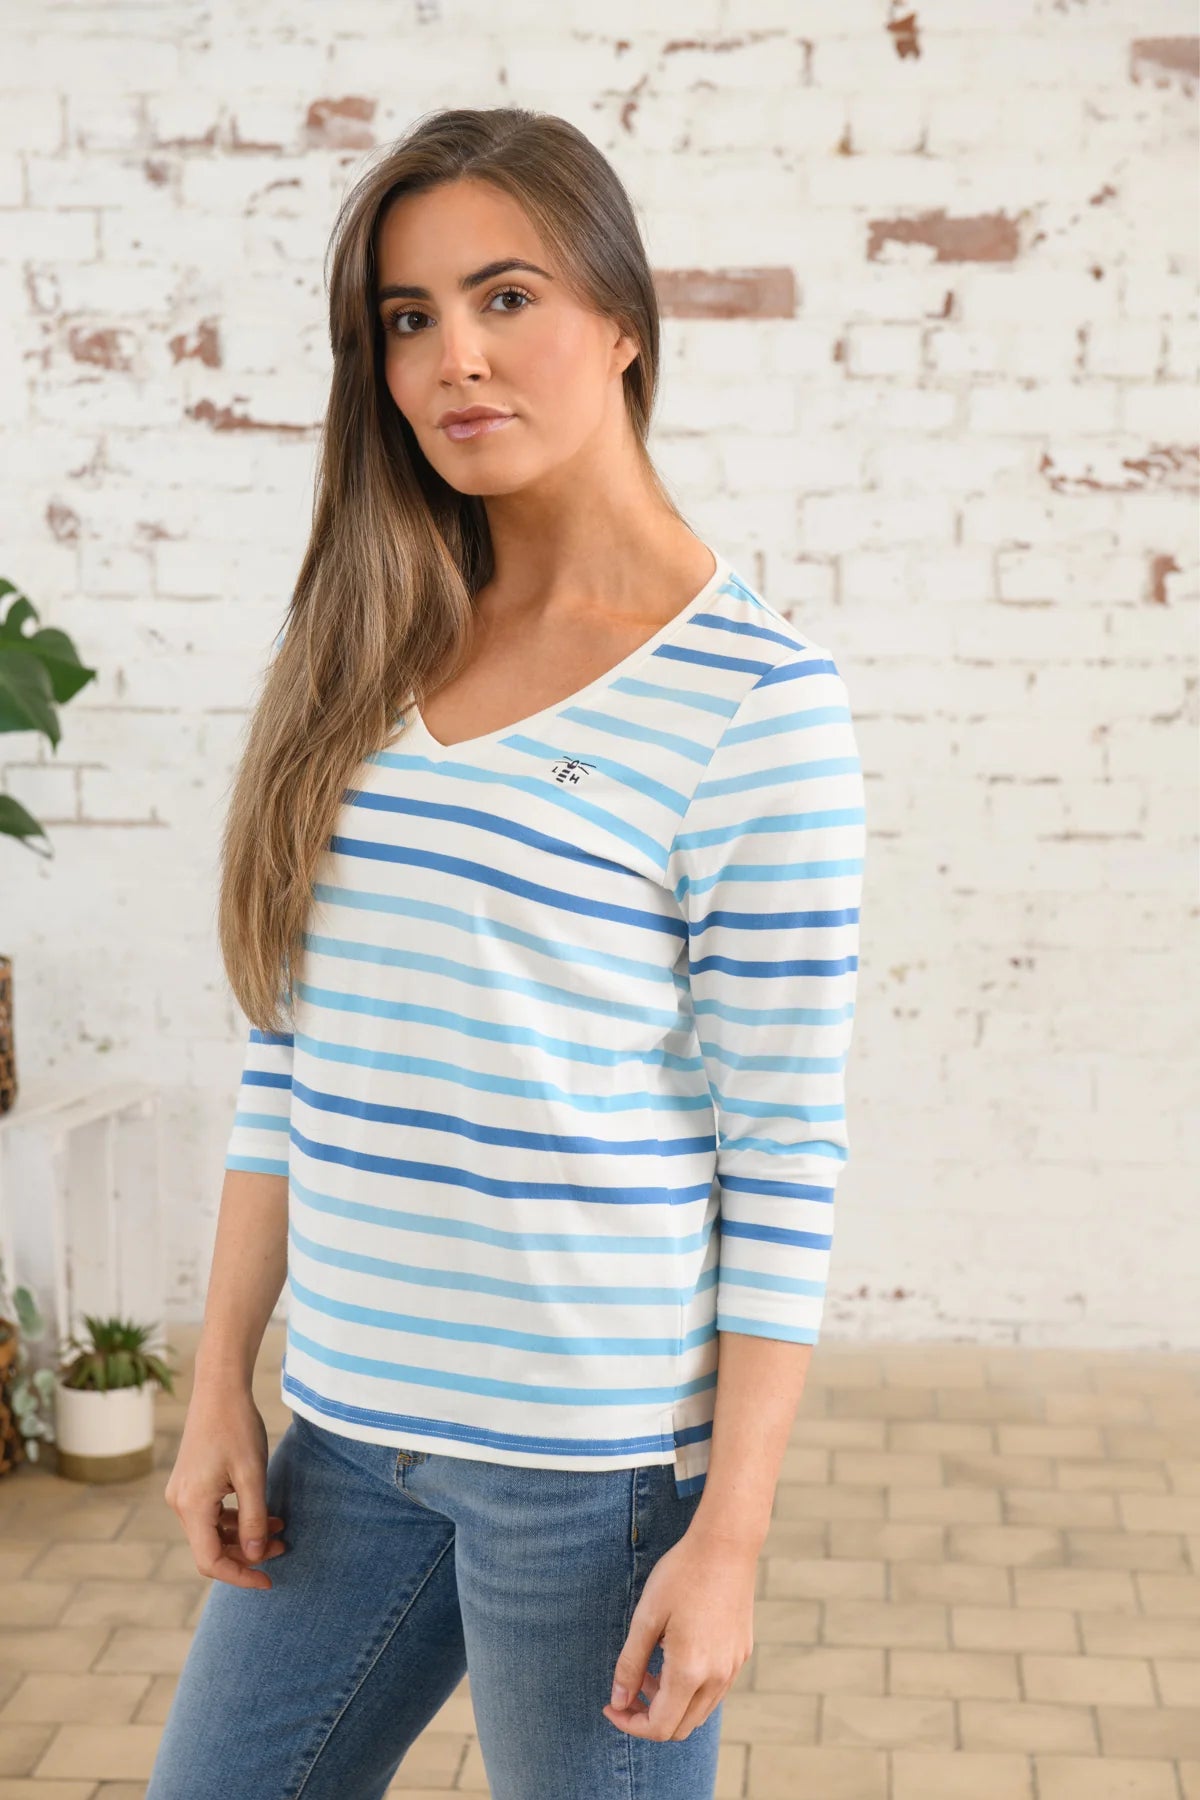 Lighthouse Ariana in Marine Blue & Seagrass Green Stripe with 3/4 Length Sleeve Top